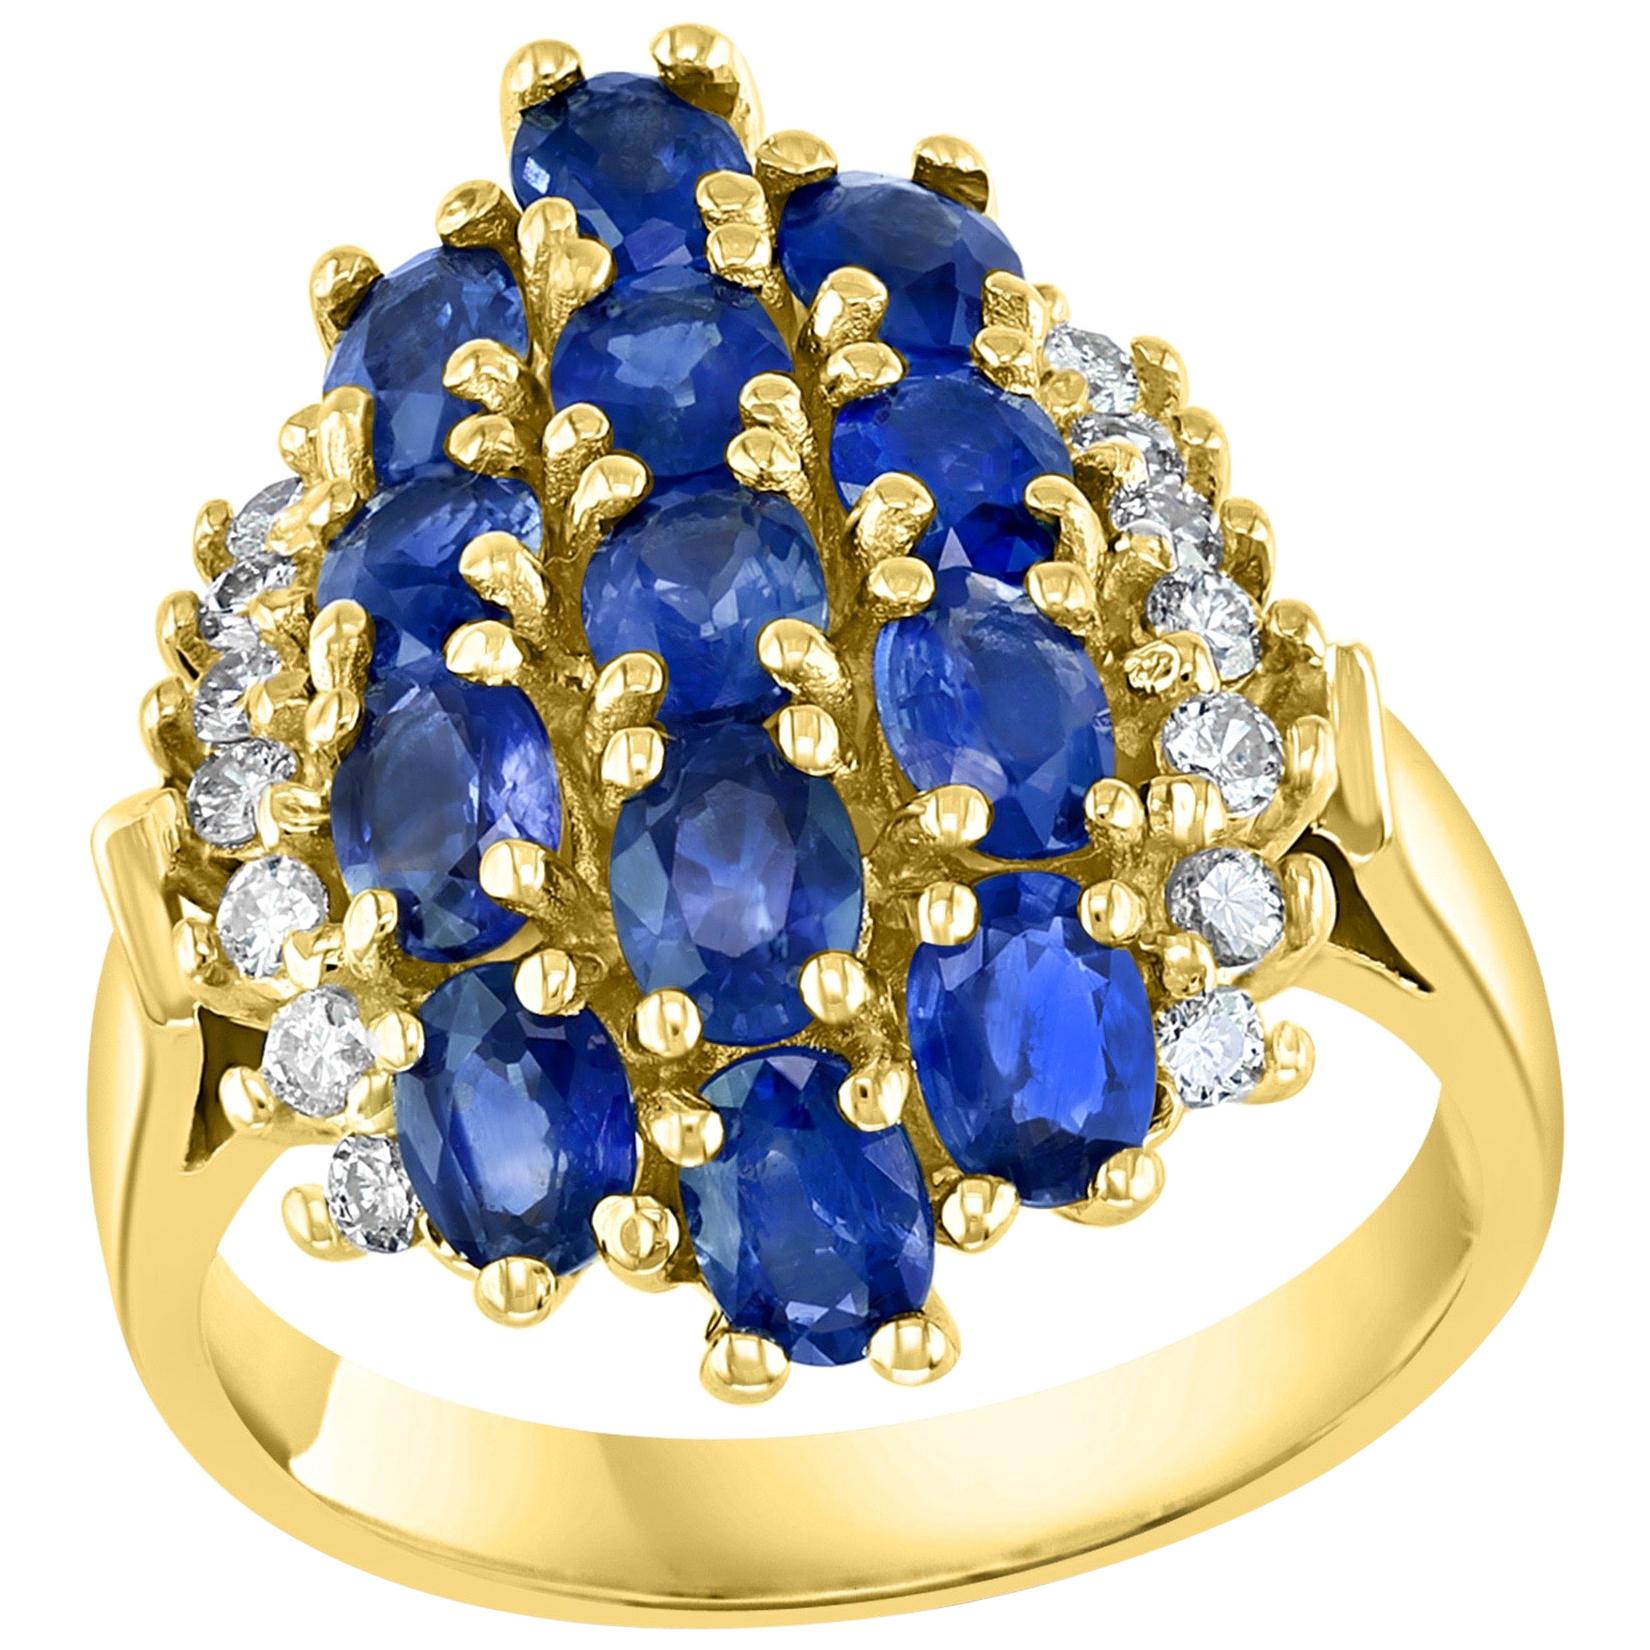 2 Carat Oval Blue Sapphire and Diamond Cocktail Ring in 14 Karat Gold Estate For Sale